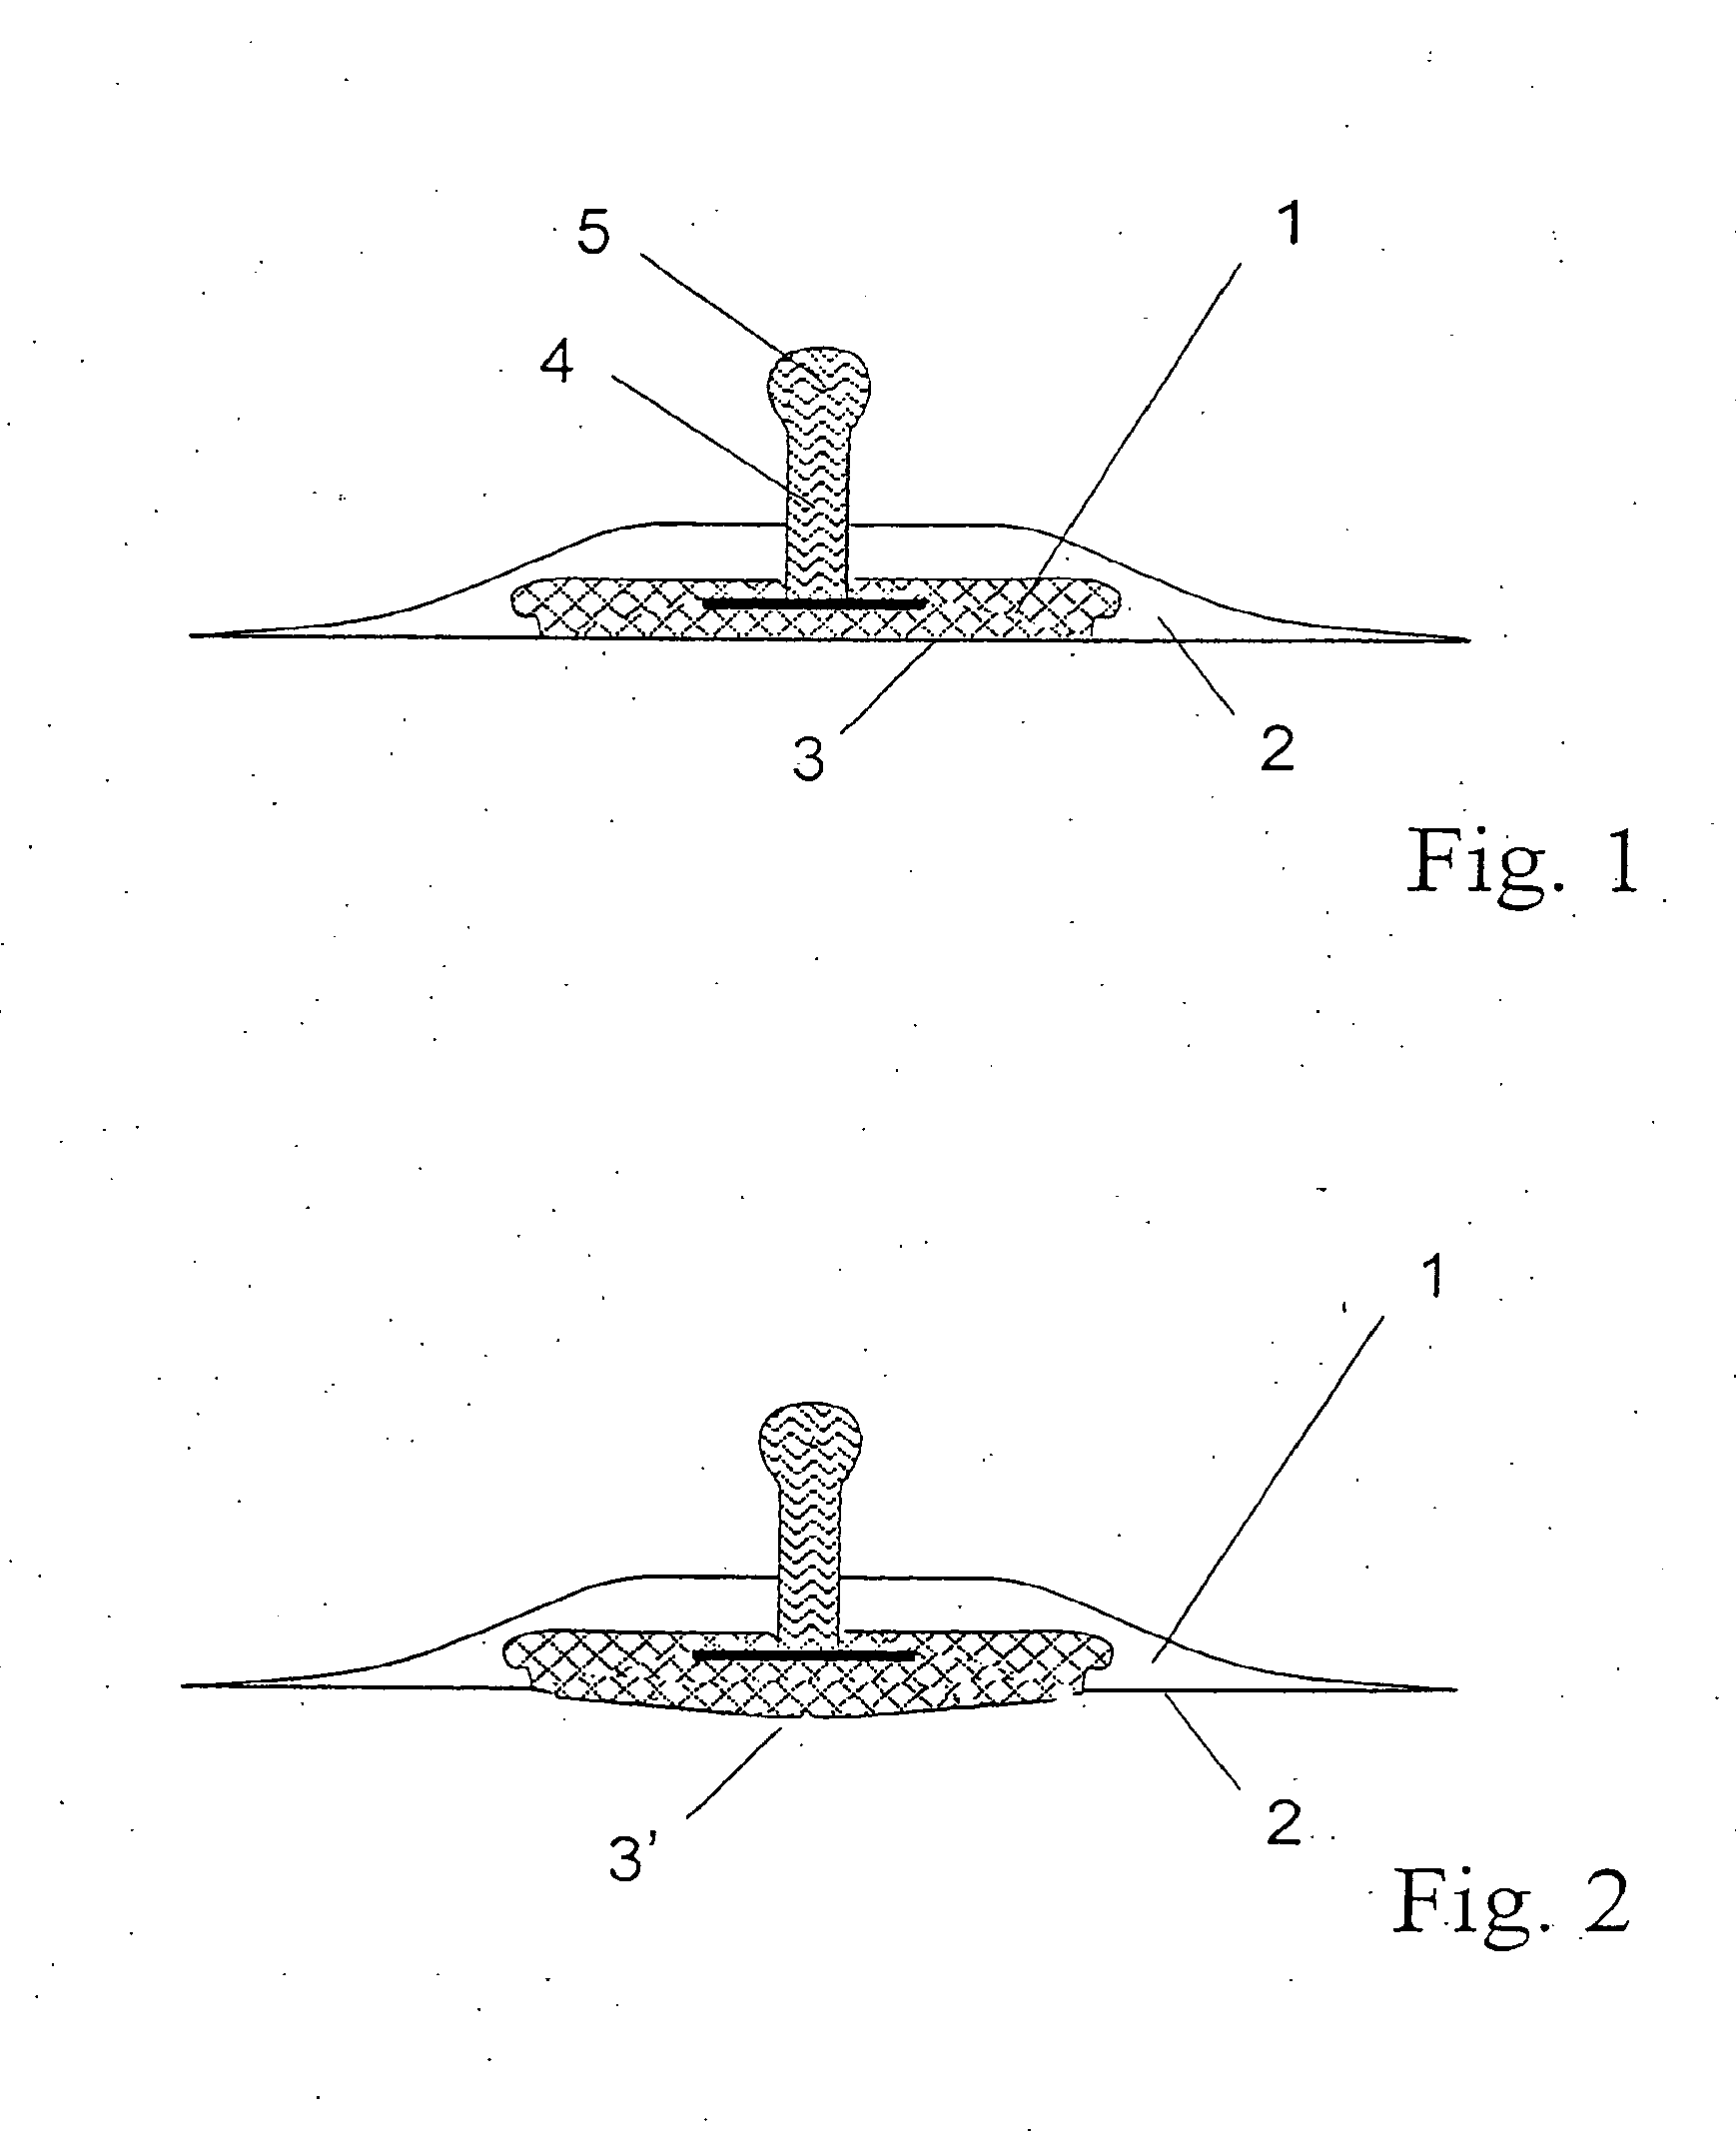 Electrode belt for carrying out electrodiagnostic procedures on the human body